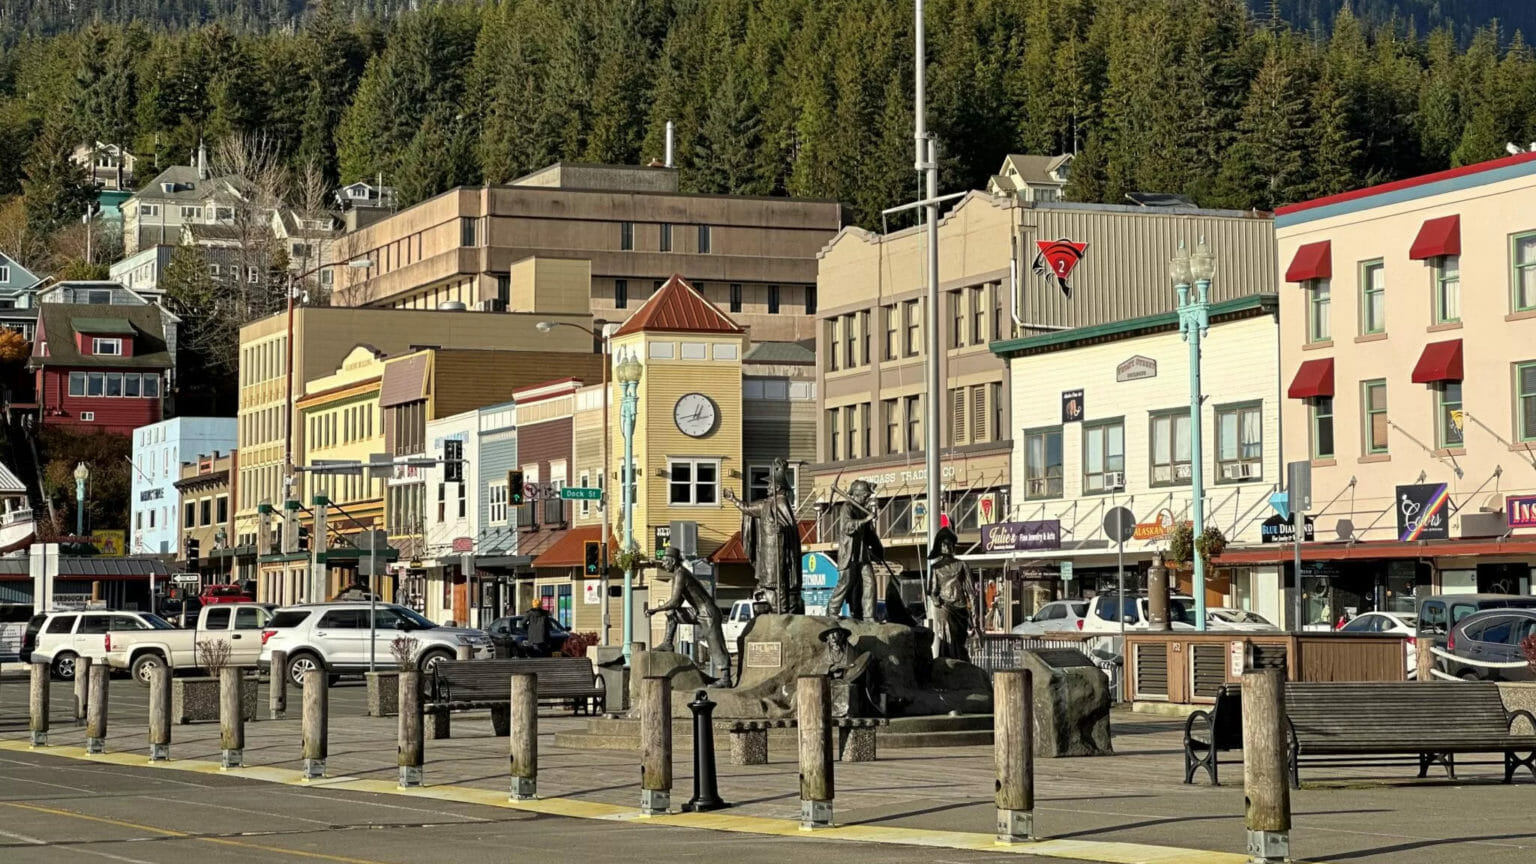 Ketchikan’s housing crisis could cost the community the loss of a generation, planning director says